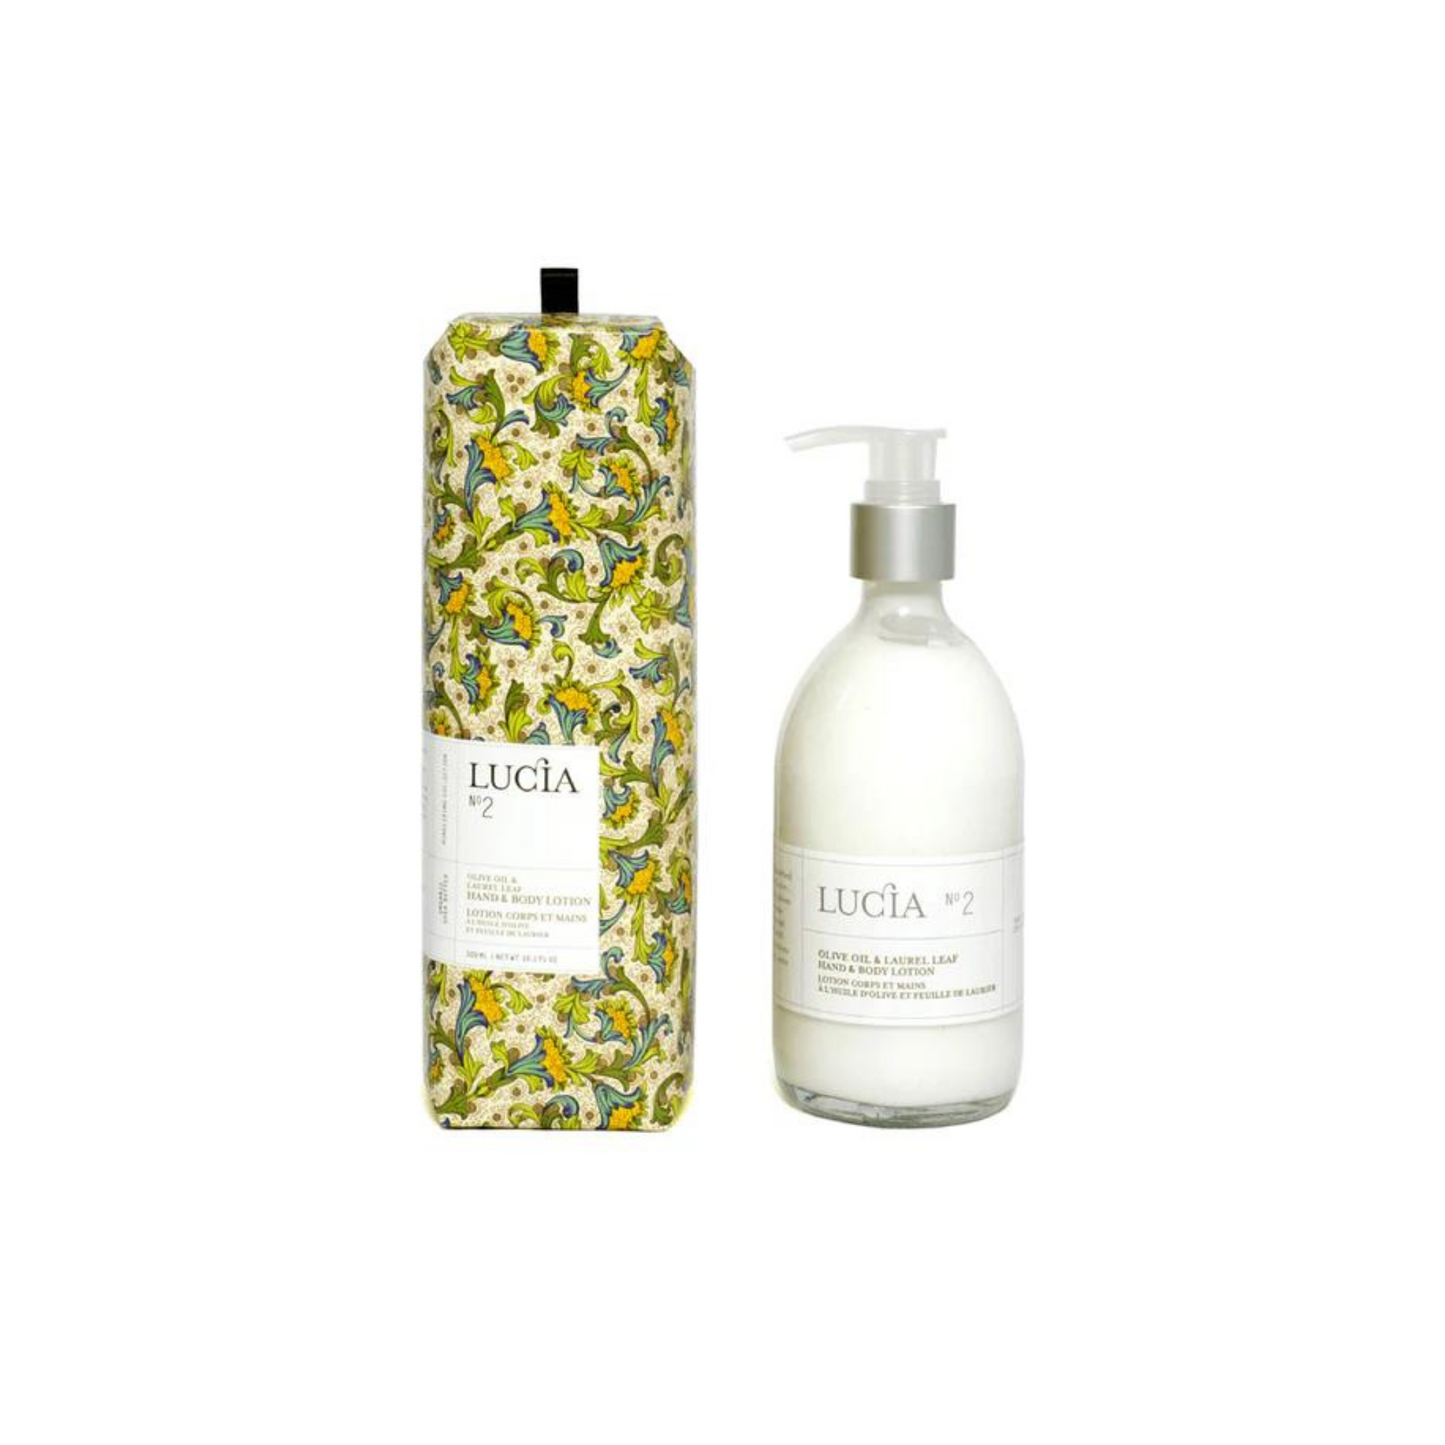 Lucia Hand & Body Lotion